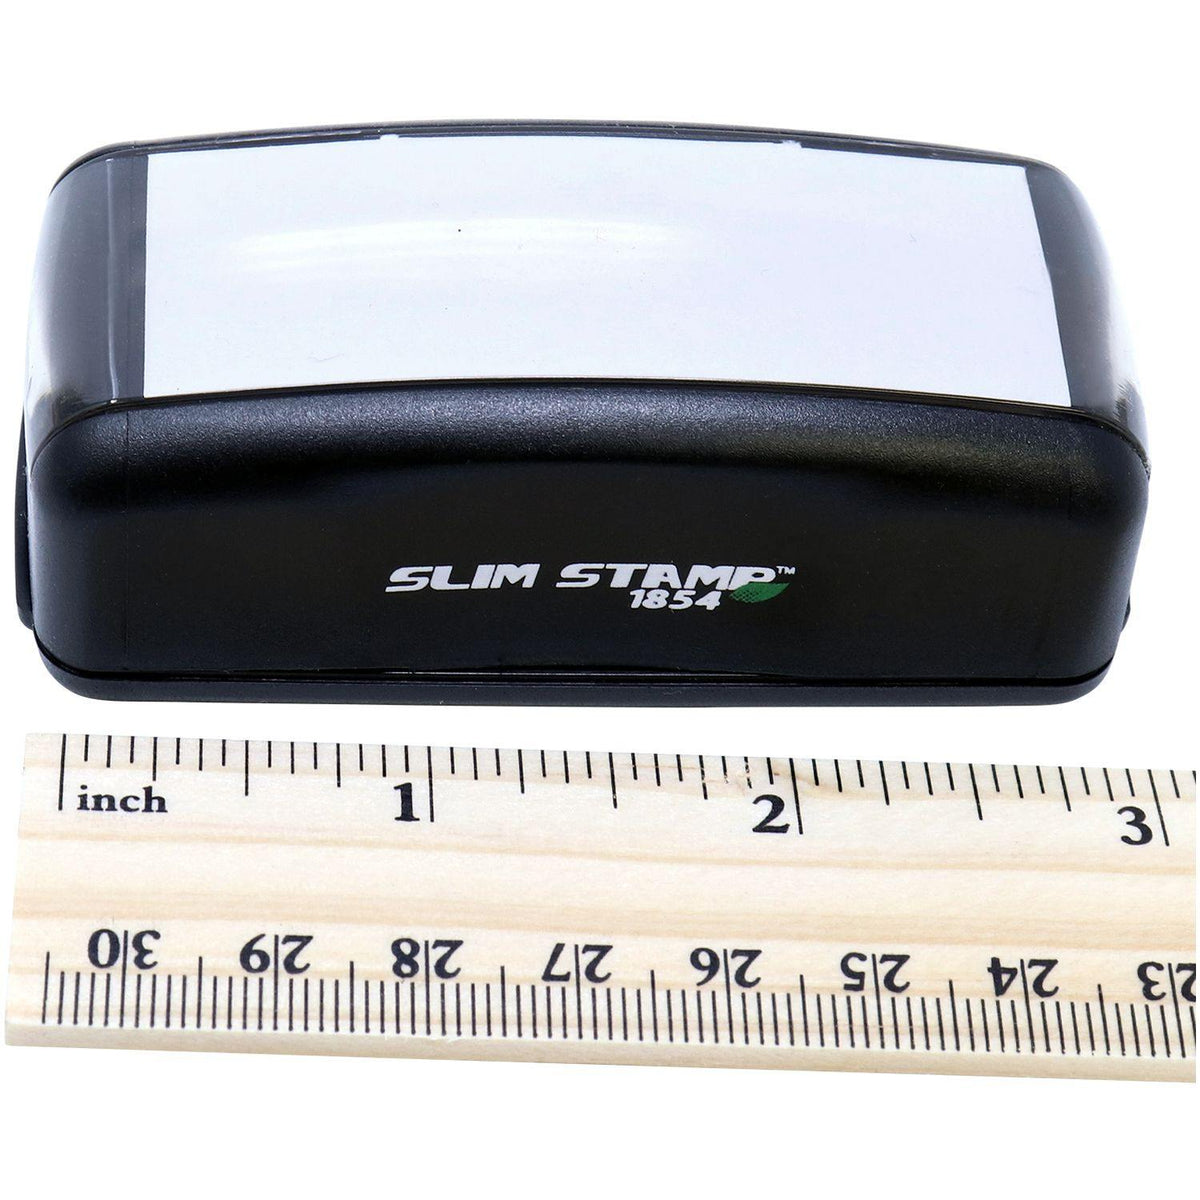 Measurement Large Pre-Inked Please See Me Stamp with Ruler